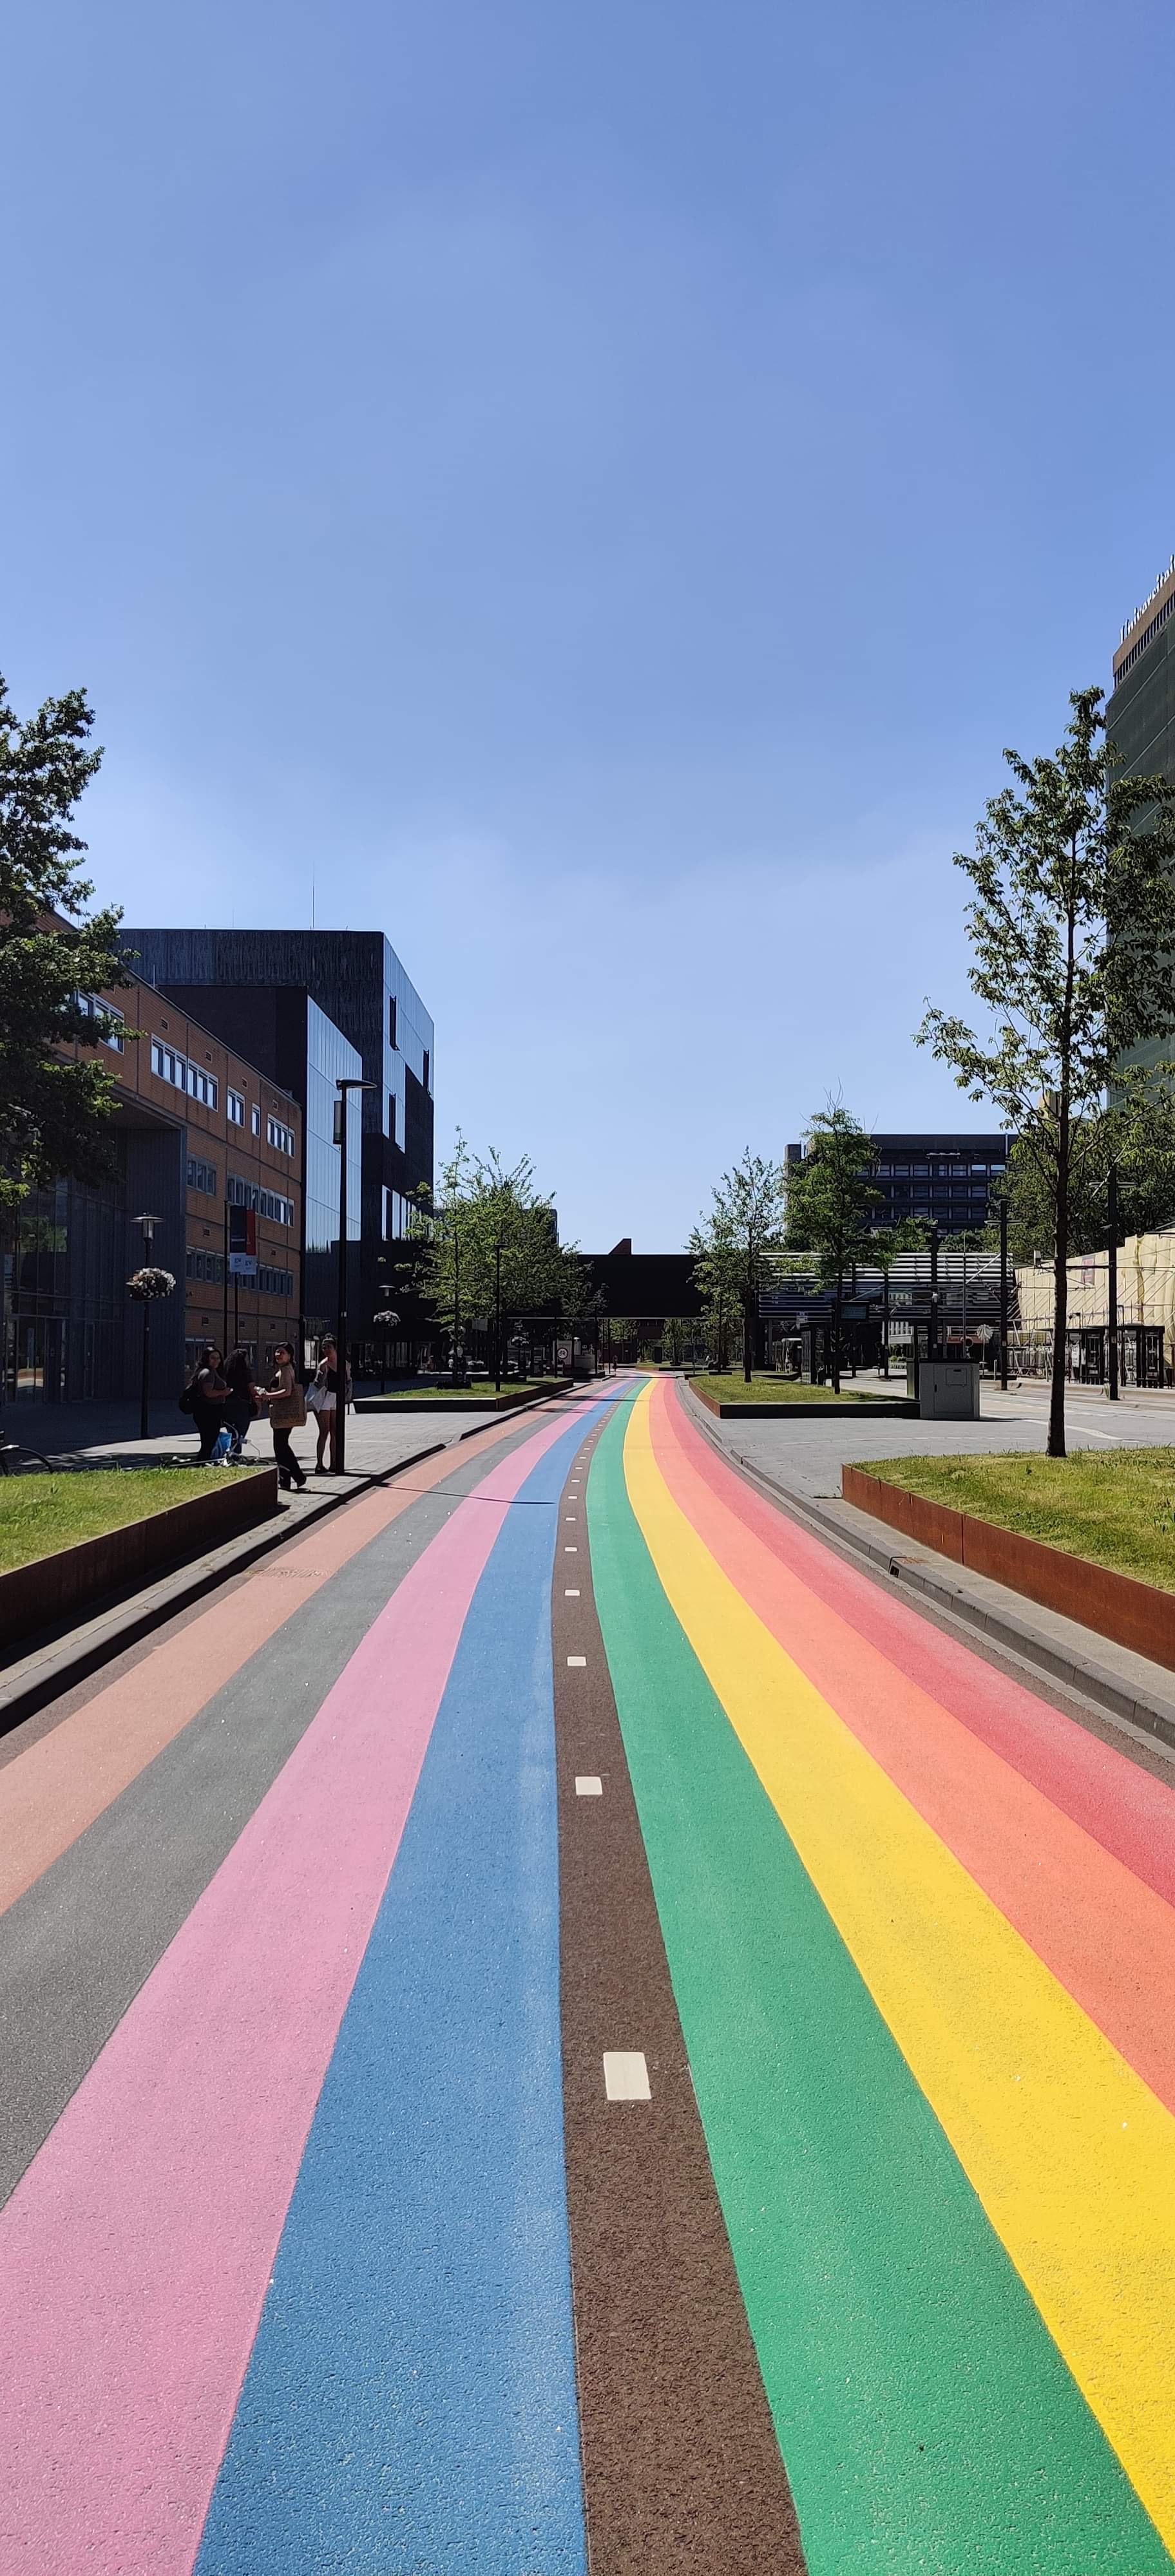 University of Applied Sciences Utrecht, Utrecht University and the UMC Utrecht have joined forces for the realisation, because they fully endorse the symbol. With the rainbow bike path the three institutions want to show that everybody is welcome to be who they are.